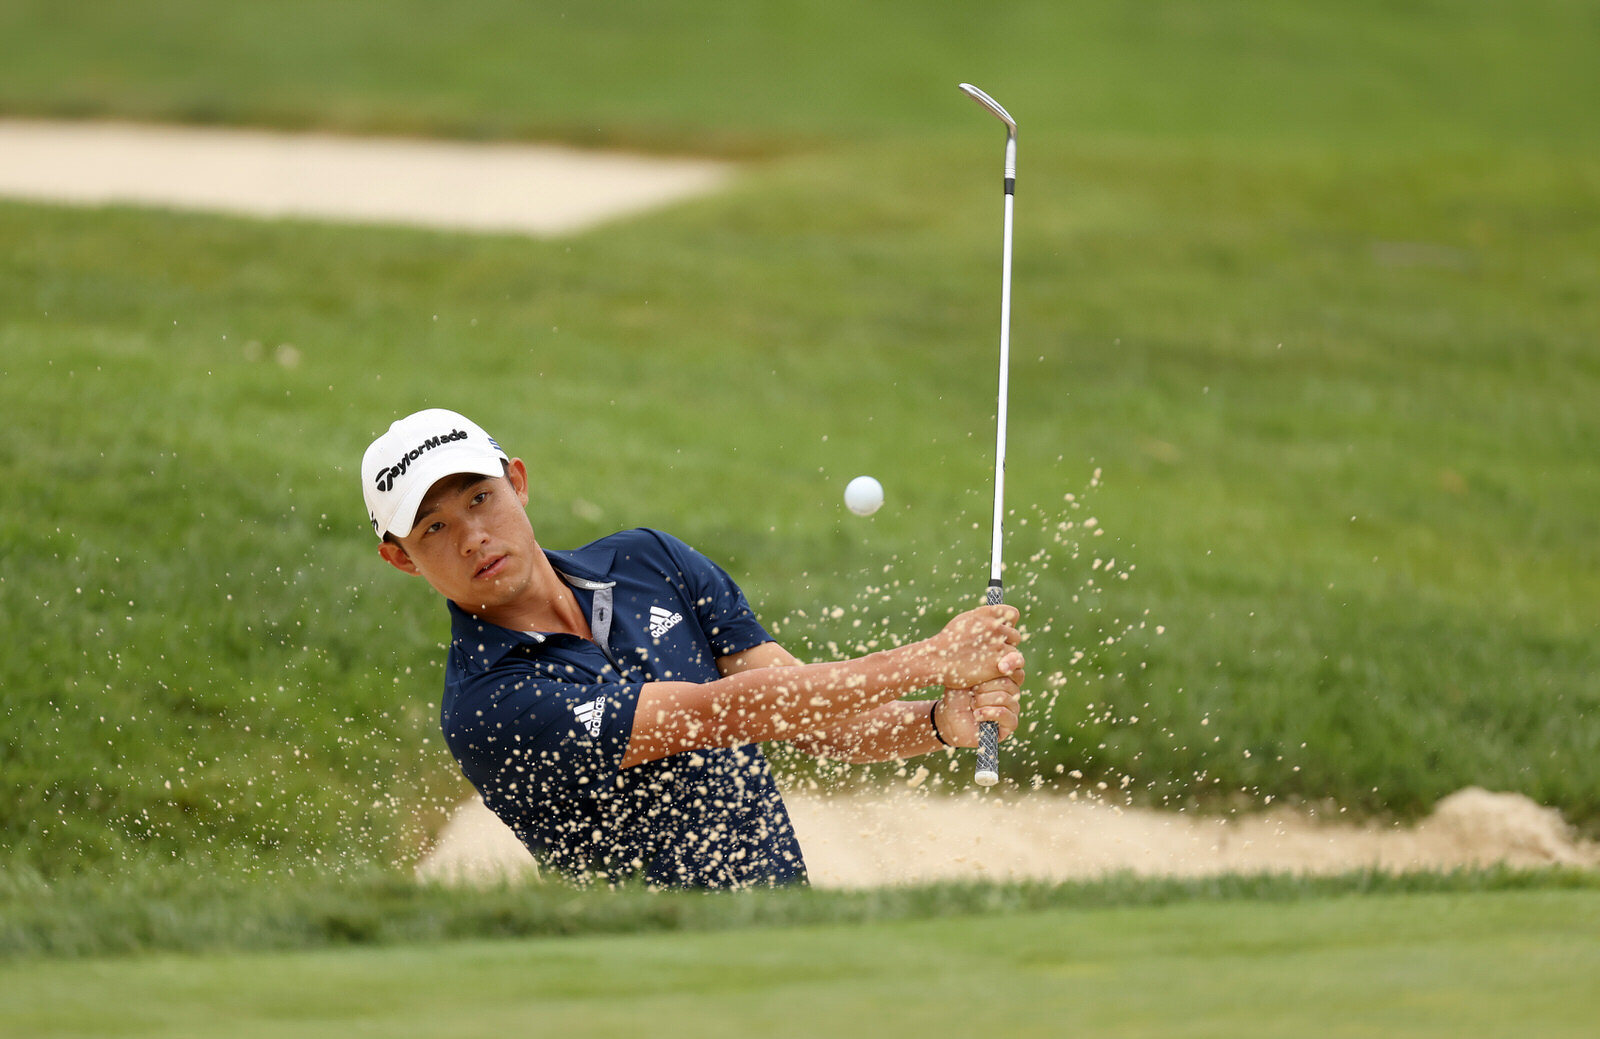  DUBLIN, OHIO - JULY 12: Collin Morikawa of the United States plays a shot from a bunker on the seventh hole during the final round of the Workday Charity Open on July 12, 2020 at Muirfield Village Golf Club in Dublin, Ohio. (Photo by Gregory Shamus/